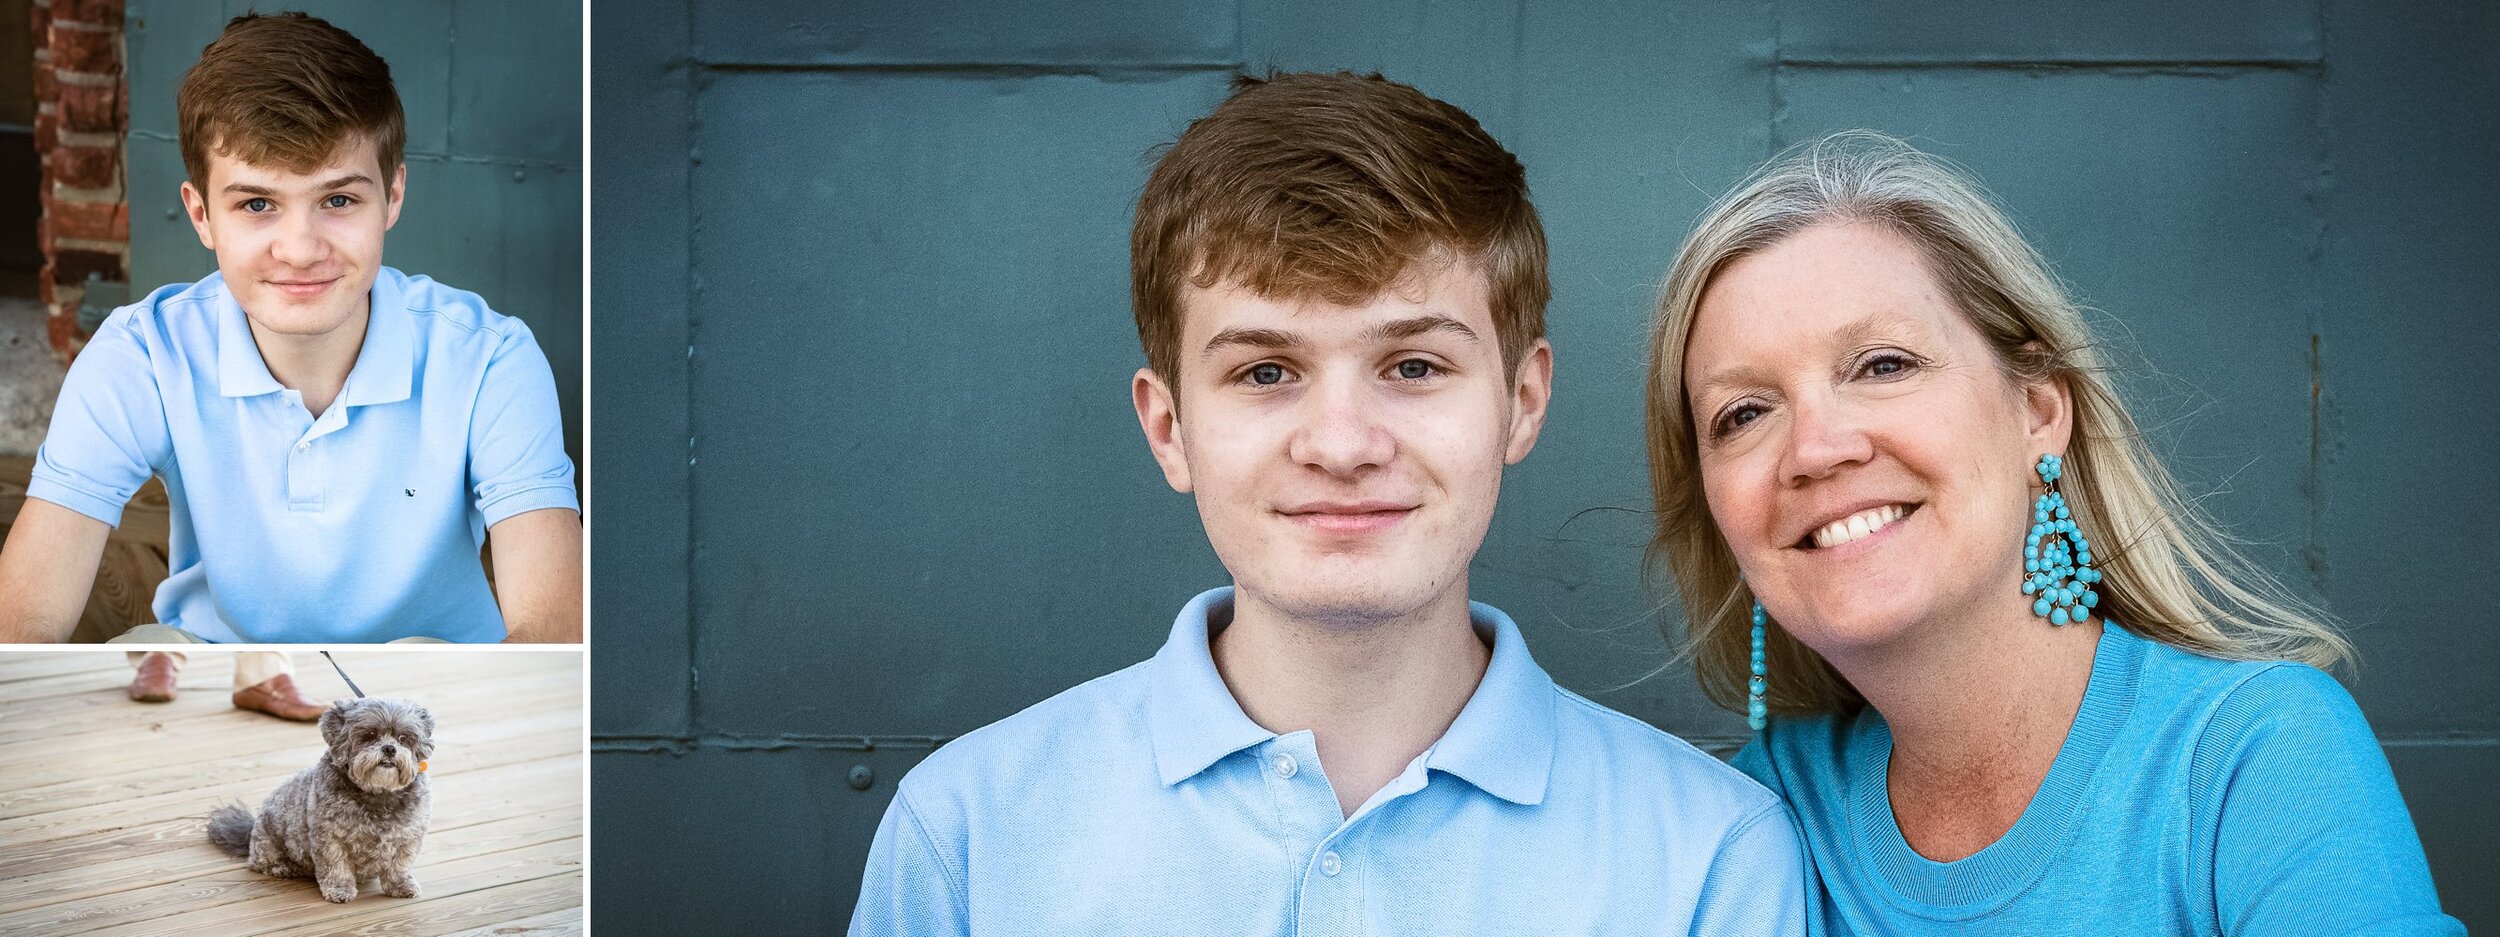 Professional_family_photographs_of_mother_and_teen_son.jpg